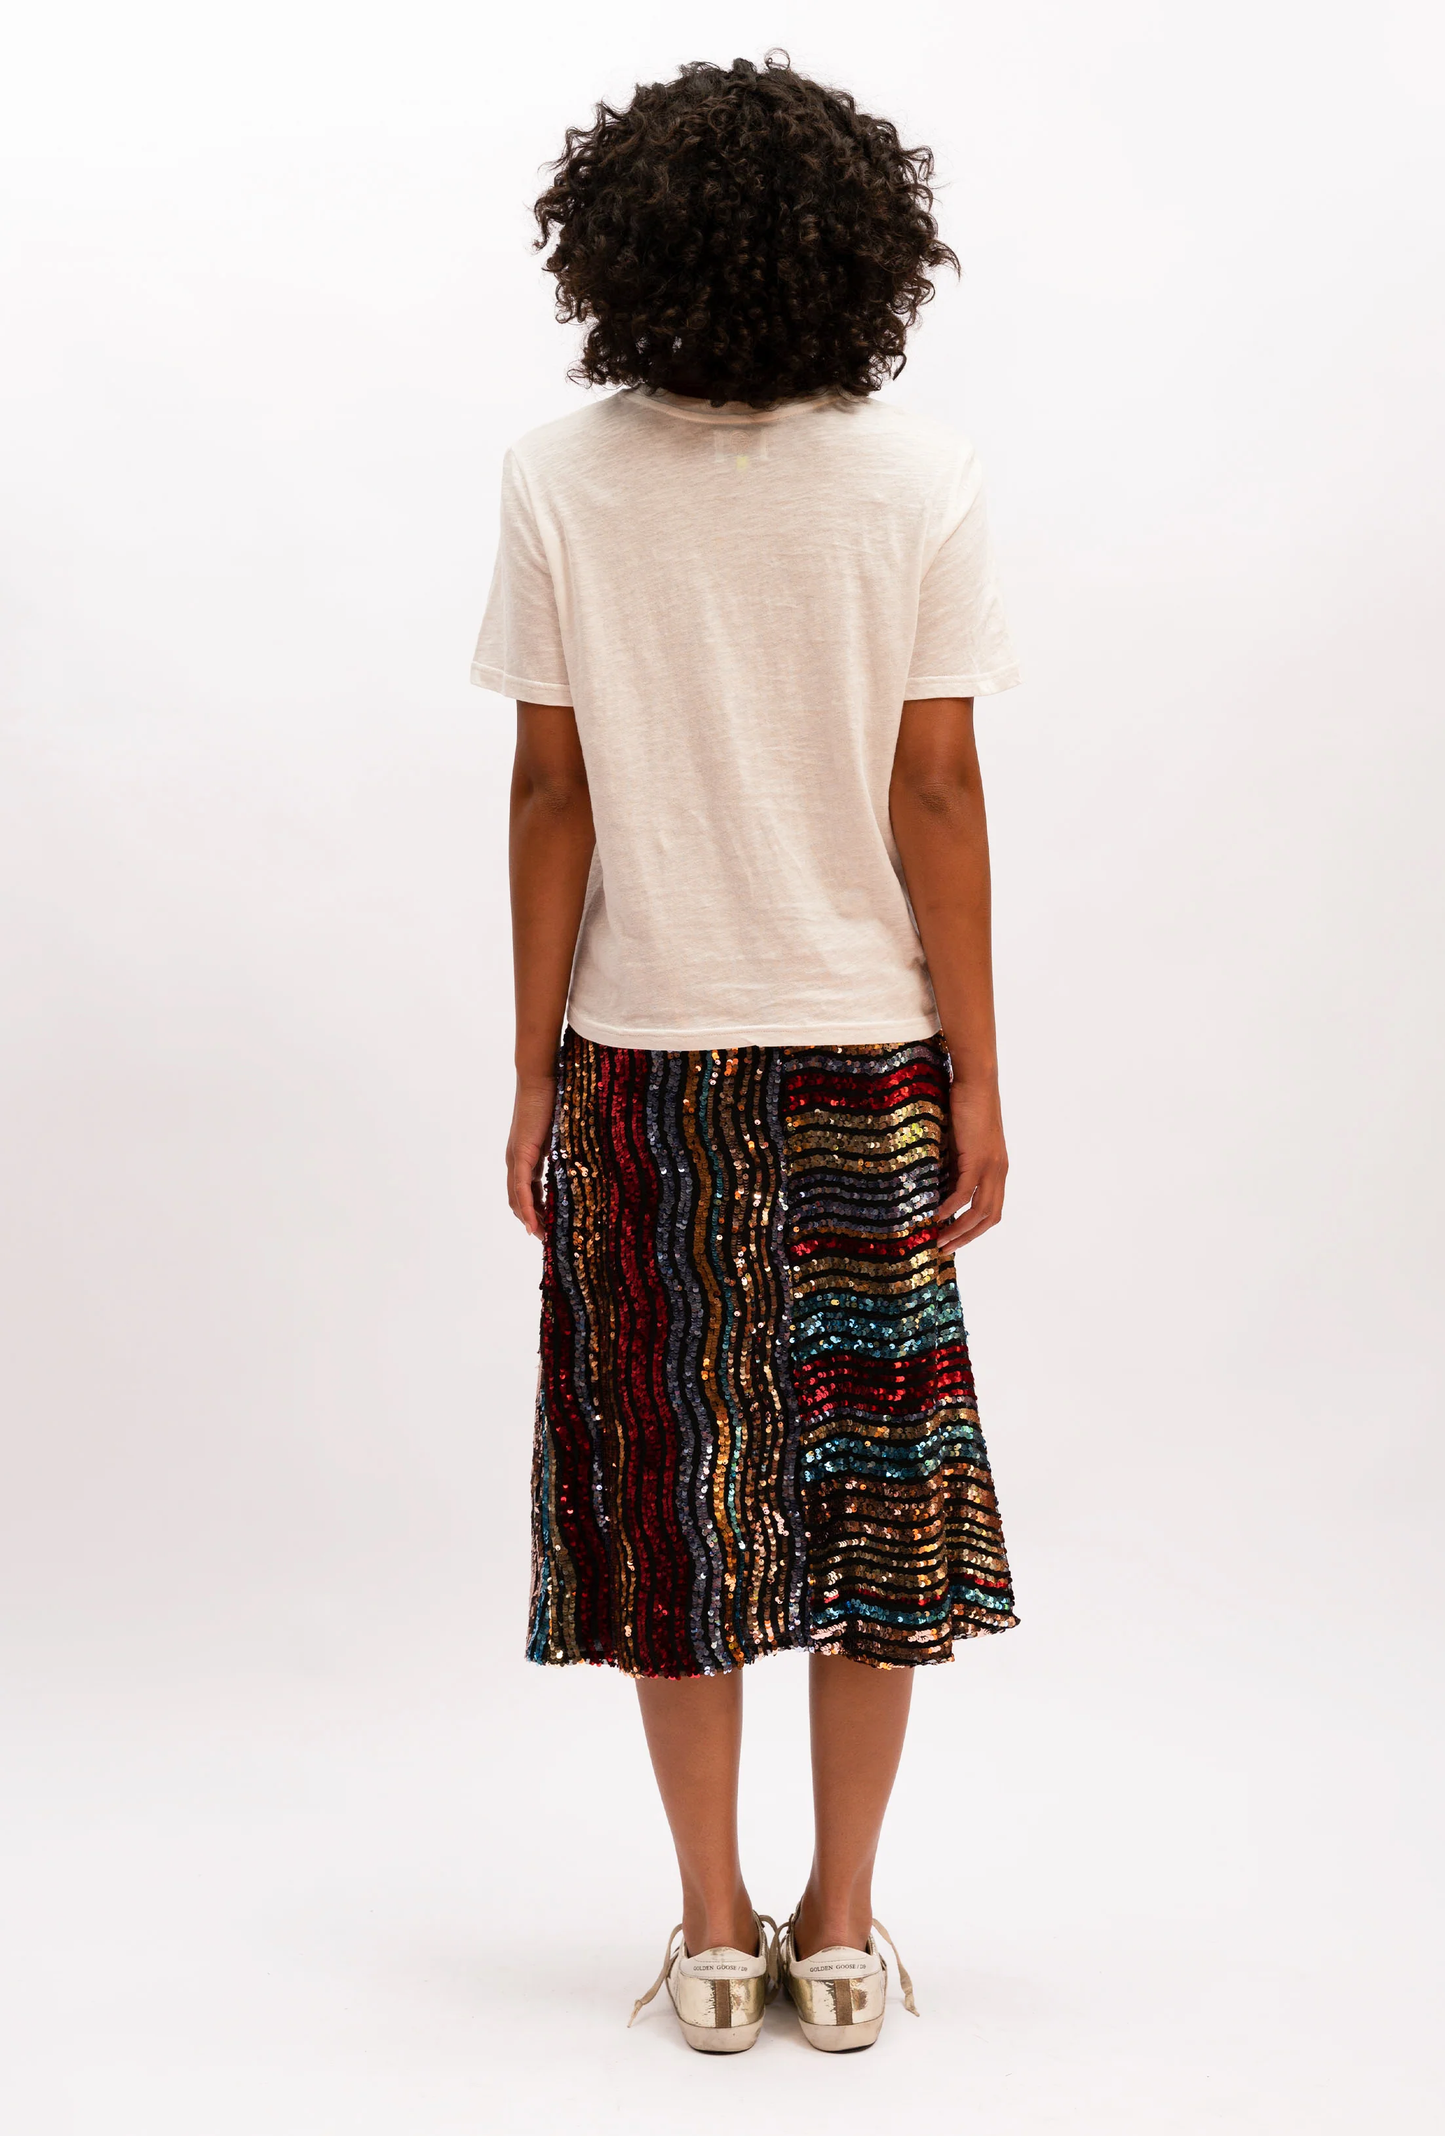 Make a statement in the Sonia Sequin Skirt from We Are The Others. This multi-hued skirt features a sequin design, an internal elastic waistband, and a convenient side seam zipper for maximum comfort. lemon cyprus boutique